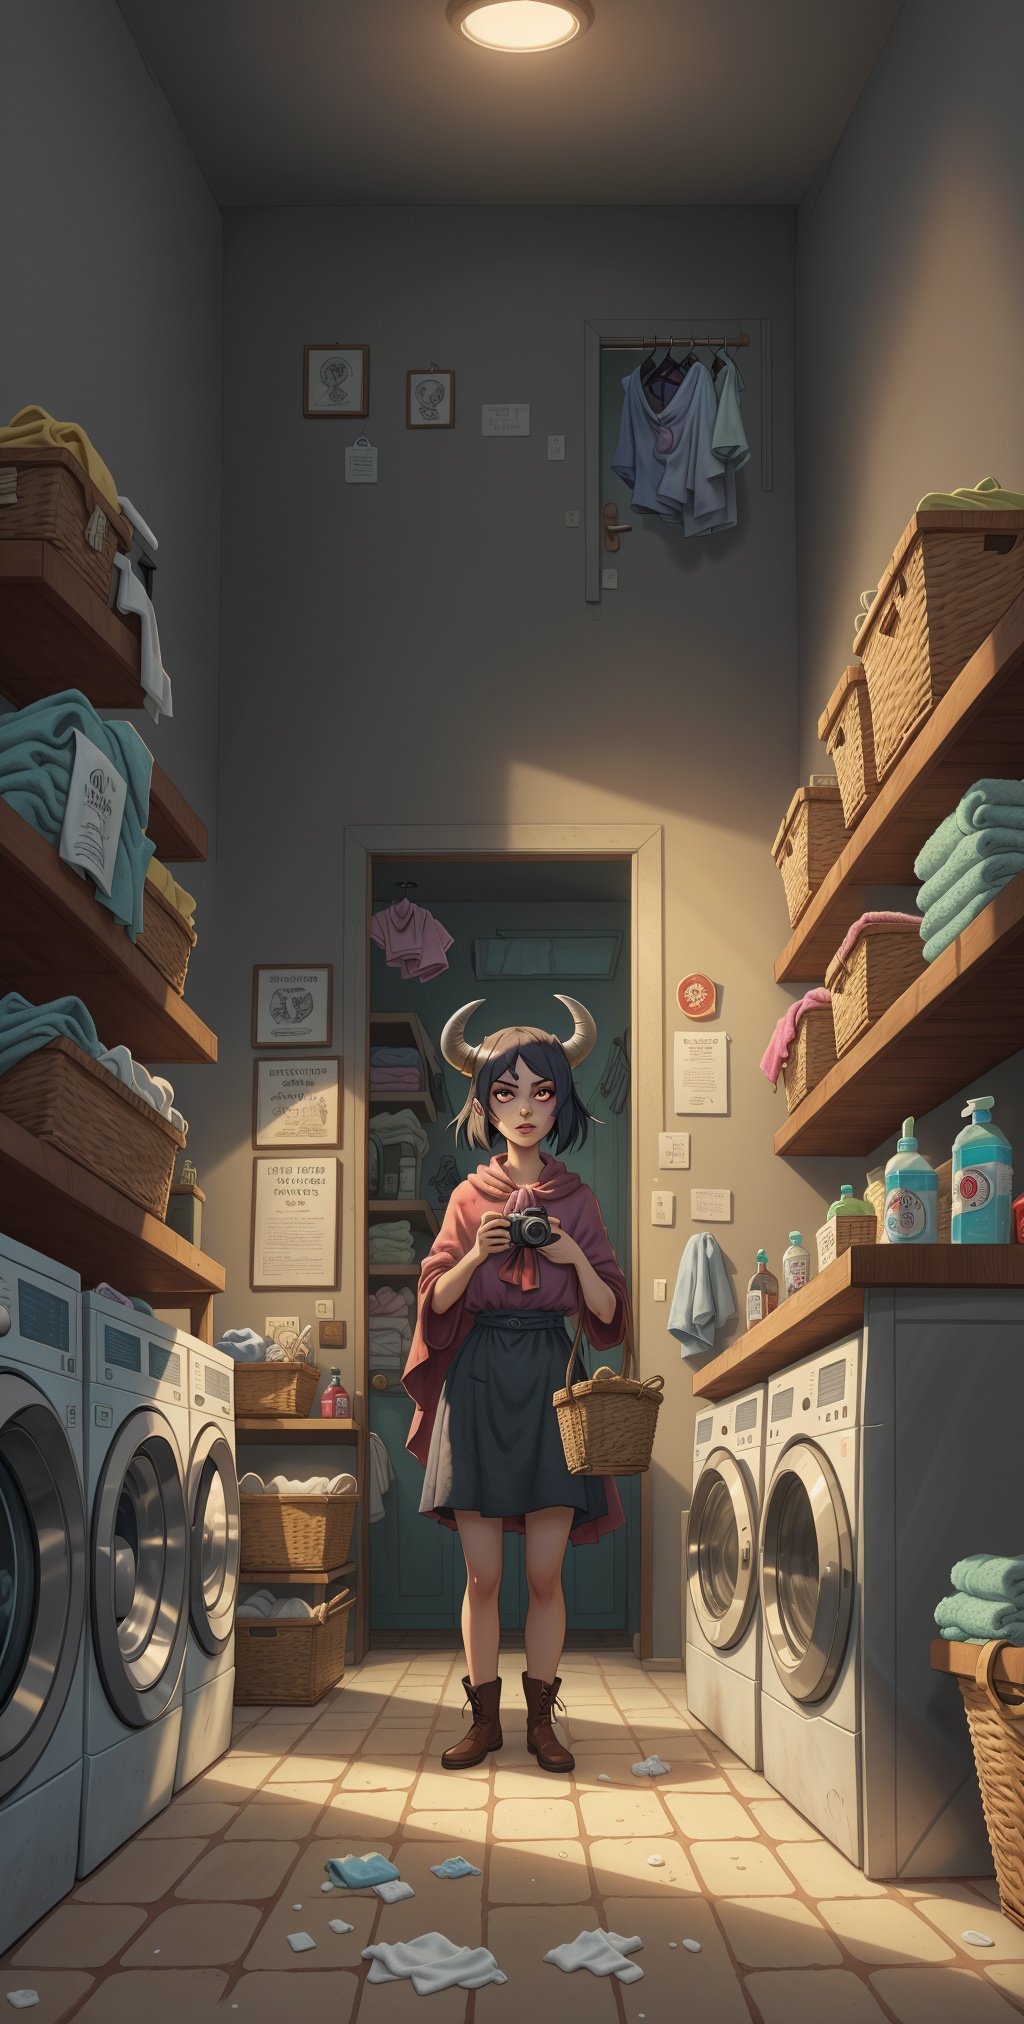 horrorart, (provoking composition:1.3), uhd, 8k, digital, a professional photo of (demon stands obscured Behind the counter:1.3)( looking at the camera:1.2) in a small cozy room with several working washing machines, surrounded by detergents, fabric softeners, and other laundry supplies. The room is cramped, with clothes baskets and hampers piled up against the walls, and the scent of detergent is heavy in the air. The dim lighting and the Yokai's presence add an eerie atmosphere, making one feel as if they've stumbled upon a secret laundry world hidden from ordinary people.